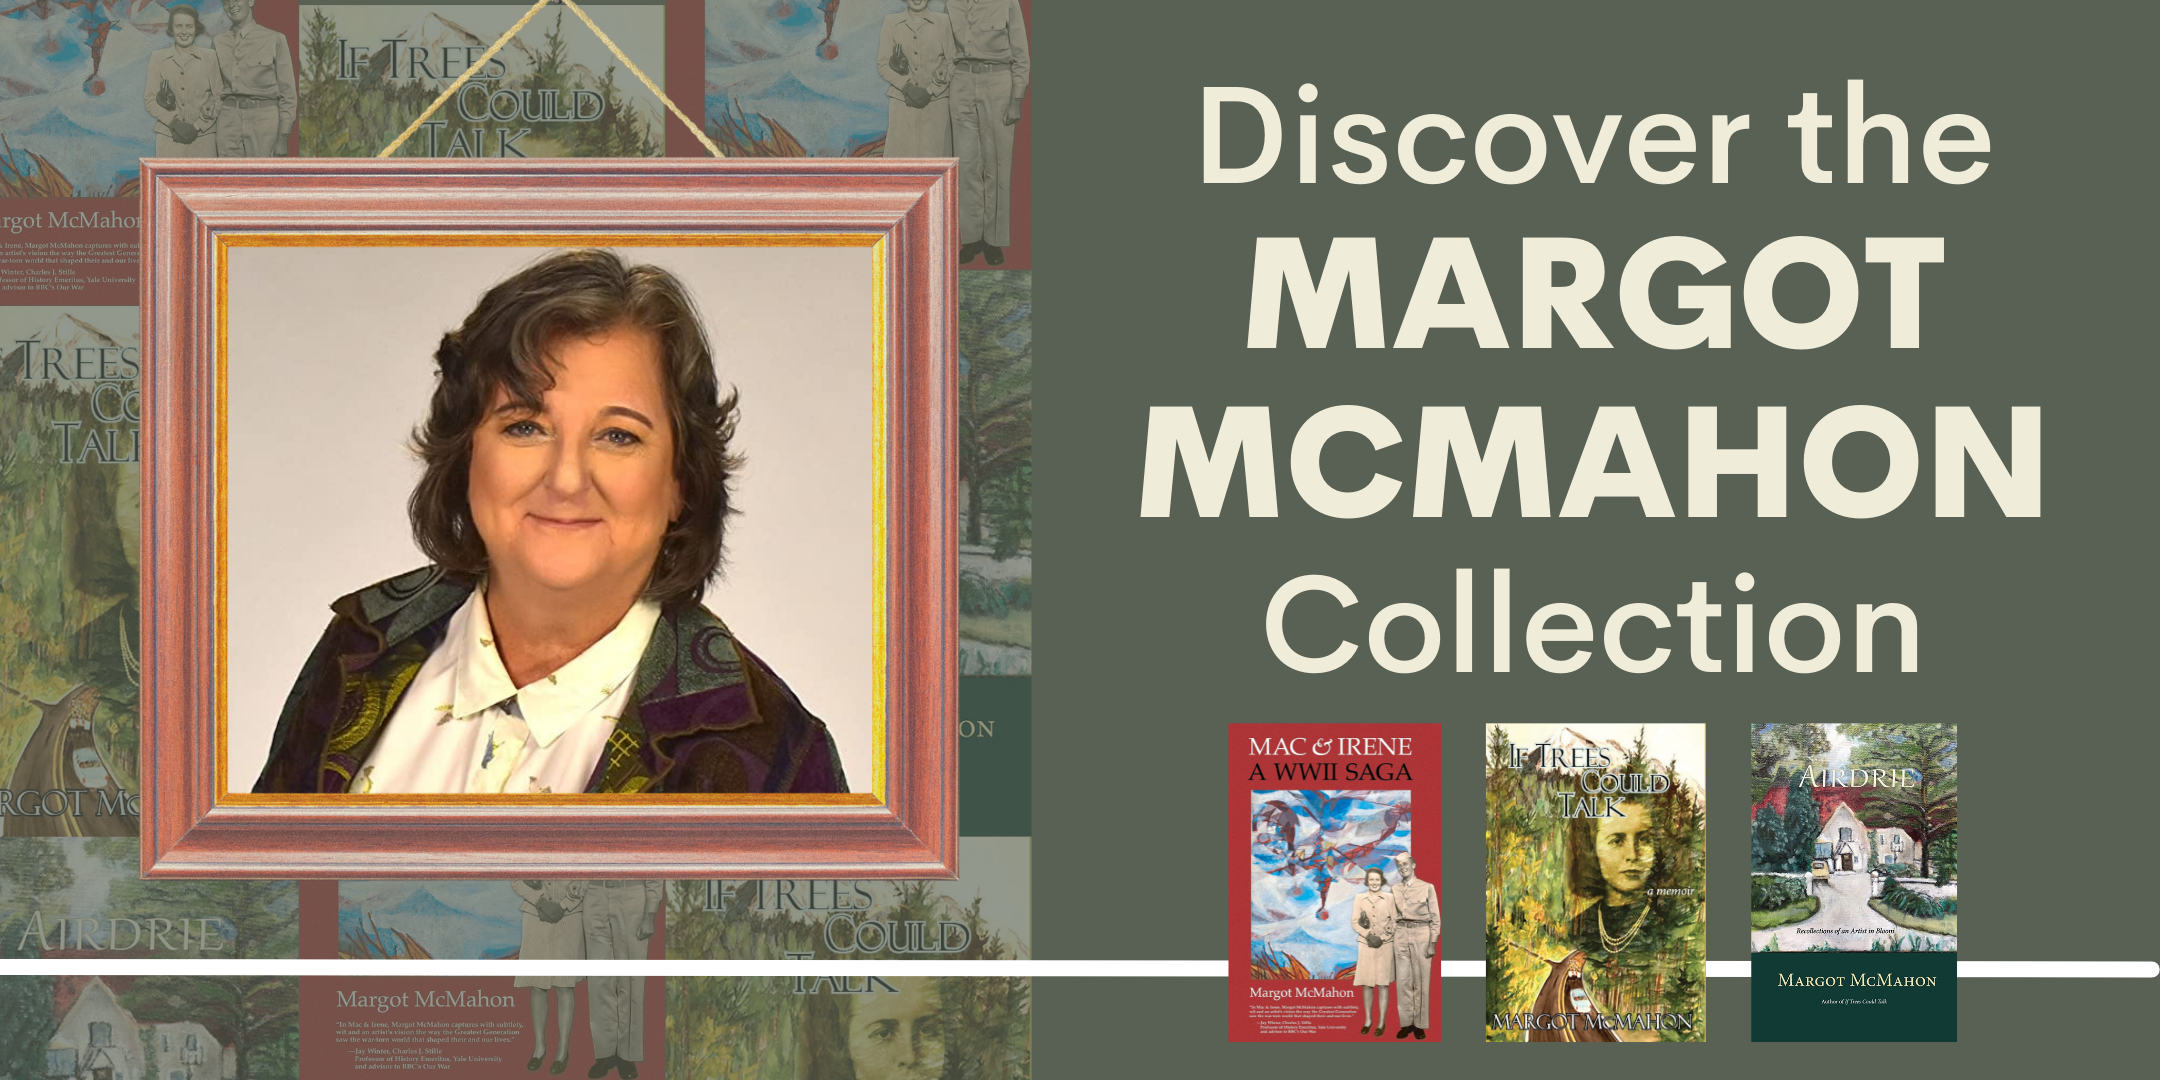 Discover the Margot McMahon Collection event image